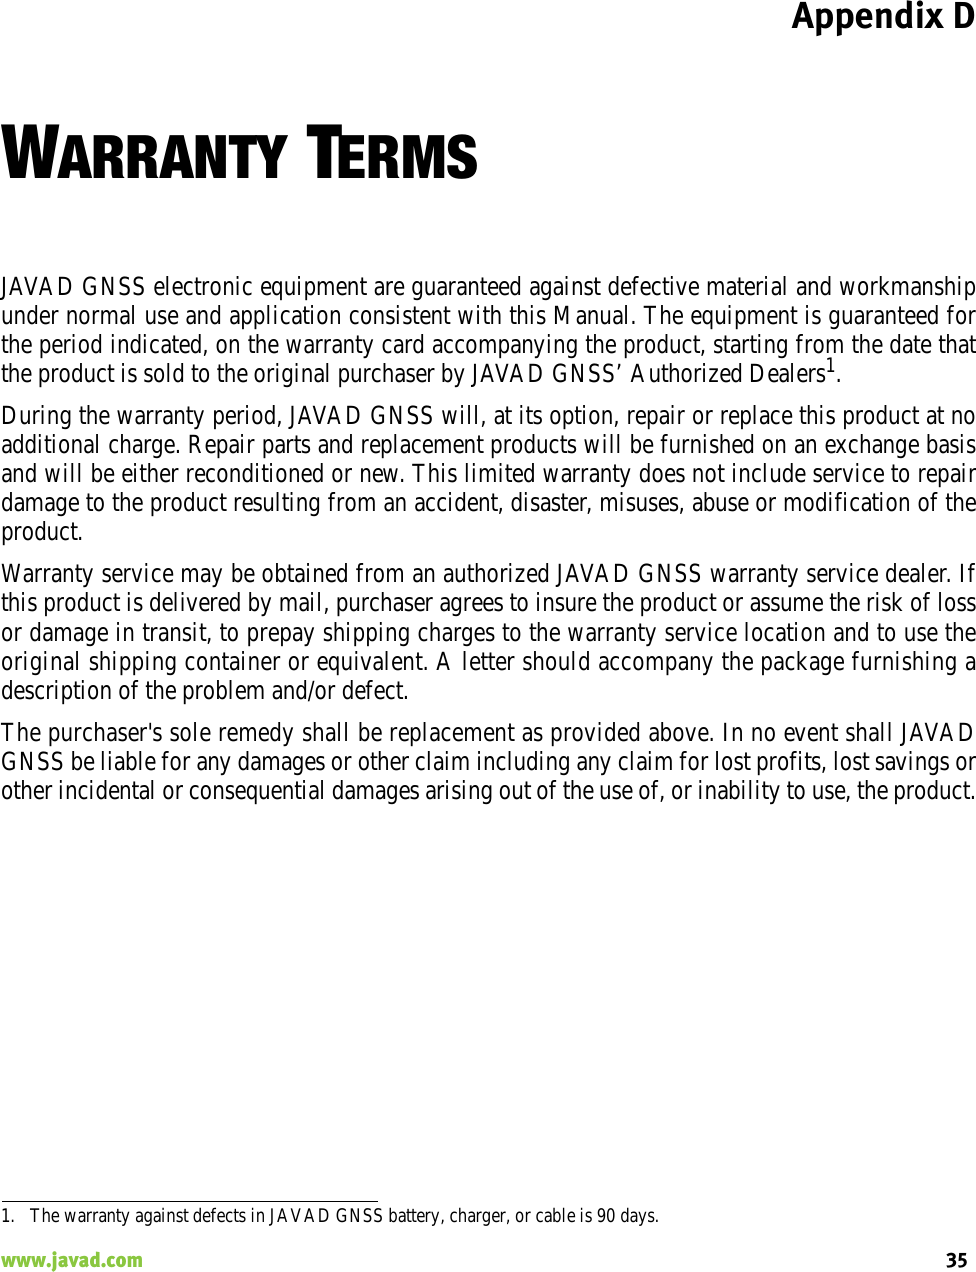 Appendix D35www.javad.com                                                                                                                                                    WARRANTY TERMSJAVAD GNSS electronic equipment are guaranteed against defective material and workmanshipunder normal use and application consistent with this Manual. The equipment is guaranteed forthe period indicated, on the warranty card accompanying the product, starting from the date thatthe product is sold to the original purchaser by JAVAD GNSS’ Authorized Dealers1.During the warranty period, JAVAD GNSS will, at its option, repair or replace this product at noadditional charge. Repair parts and replacement products will be furnished on an exchange basisand will be either reconditioned or new. This limited warranty does not include service to repairdamage to the product resulting from an accident, disaster, misuses, abuse or modification of theproduct.Warranty service may be obtained from an authorized JAVAD GNSS warranty service dealer. Ifthis product is delivered by mail, purchaser agrees to insure the product or assume the risk of lossor damage in transit, to prepay shipping charges to the warranty service location and to use theoriginal shipping container or equivalent. A letter should accompany the package furnishing adescription of the problem and/or defect.The purchaser&apos;s sole remedy shall be replacement as provided above. In no event shall JAVADGNSS be liable for any damages or other claim including any claim for lost profits, lost savings orother incidental or consequential damages arising out of the use of, or inability to use, the product.1. The warranty against defects in JAVAD GNSS battery, charger, or cable is 90 days.